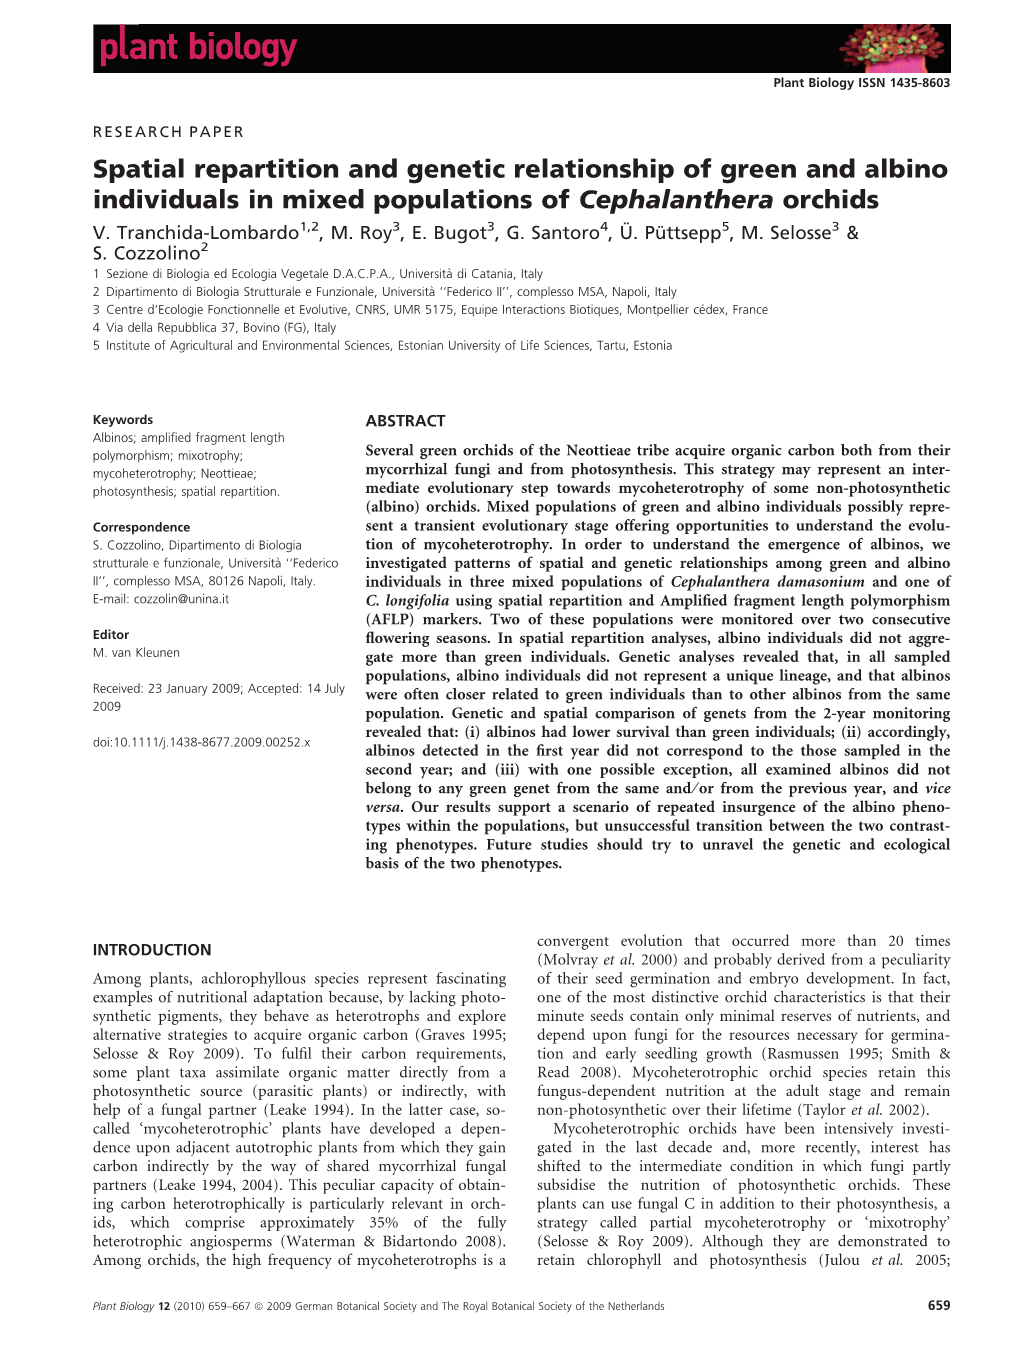 Spatial Repartition and Genetic Relationship of Green and Albino Individuals in Mixed Populations of Cephalanthera Orchids V